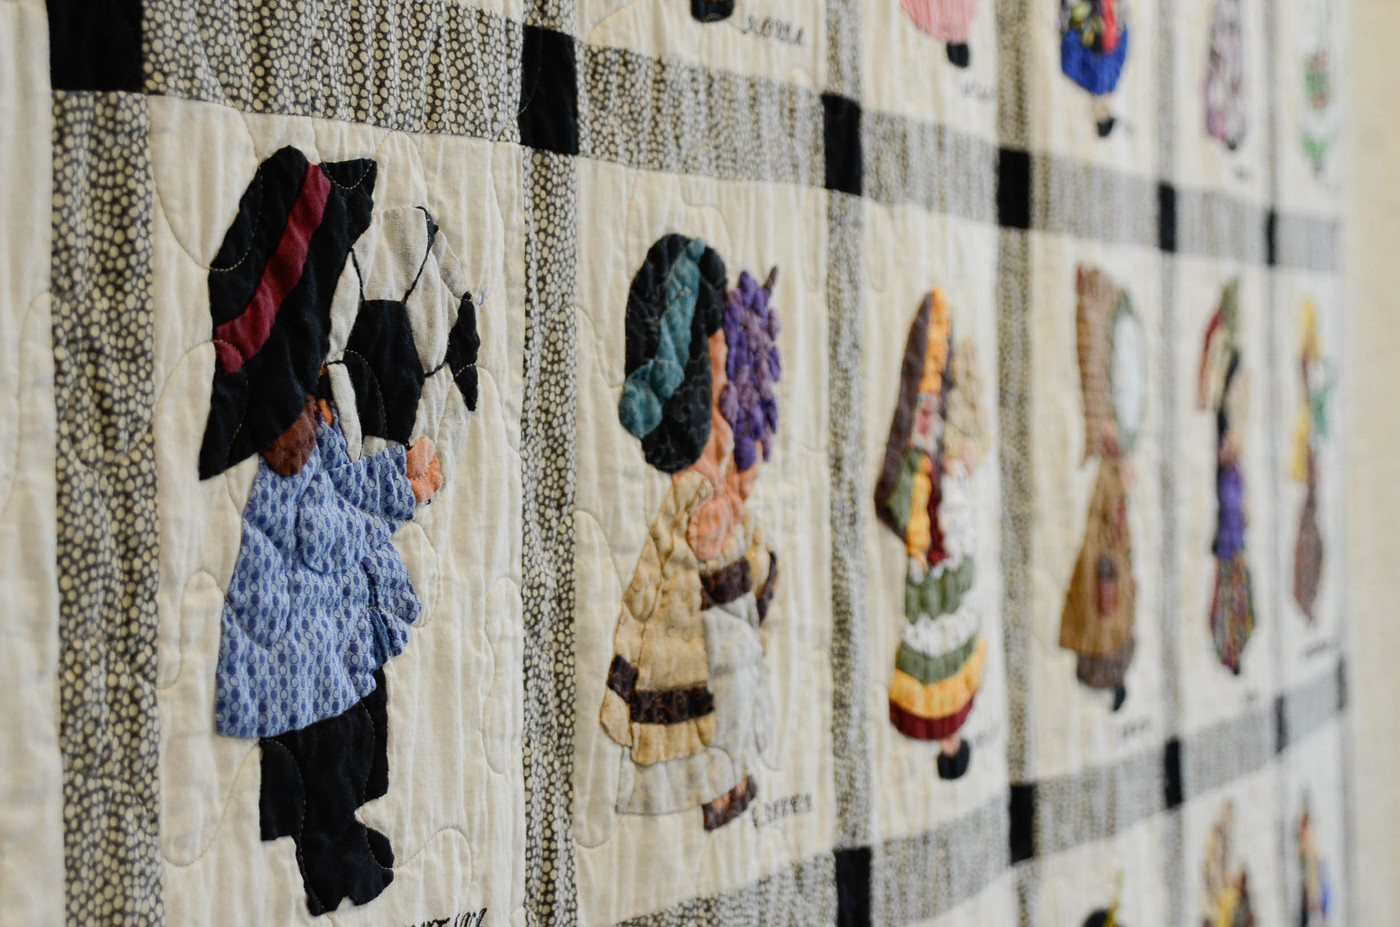 The Applique quilt titled " Join The Army and See the World, " by Eileen Udivich, is on display at the Veteran’s Art Show.  It is part of a gallery on the third floor of the City College West Sacramento Center. April 9, 2016. Christopher Williams, Staff Photographer. |chrisWexpress@gmail.com